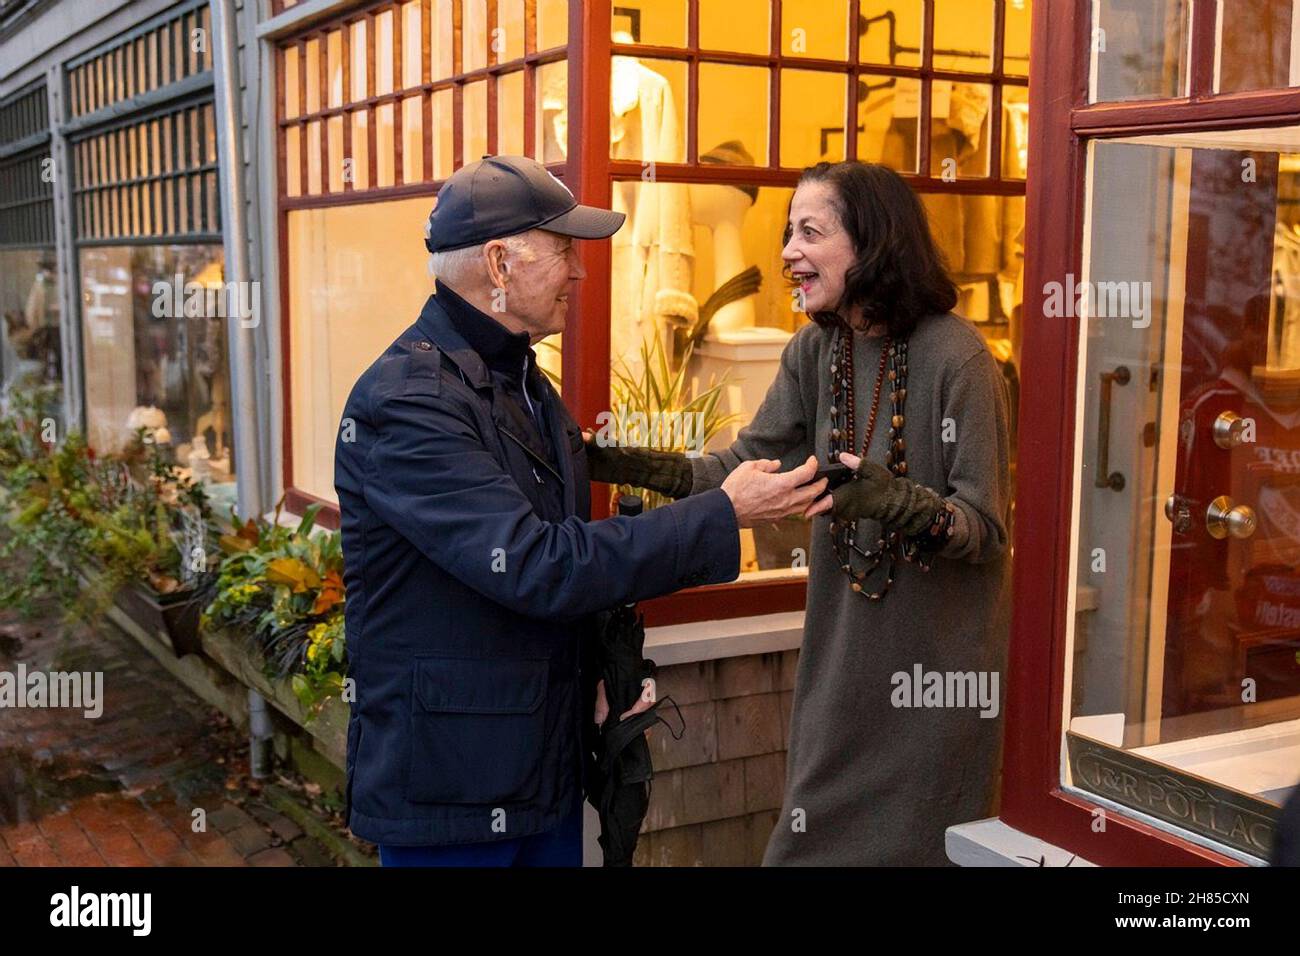 Nantucket, United States Of America. 26th Nov, 2021. Nantucket, United States of America. 26 November, 2021. U.S President Joe Biden, left, greets a small business owner during Black Friday sales day November 26, 2021 in Nantucket, Massachusetts. Biden spend the day visiting local shops and attending the annual village Christmas tree lighting ceremony with his family. Credit: Adam Schultz/White House Photo/Alamy Live News Stock Photo